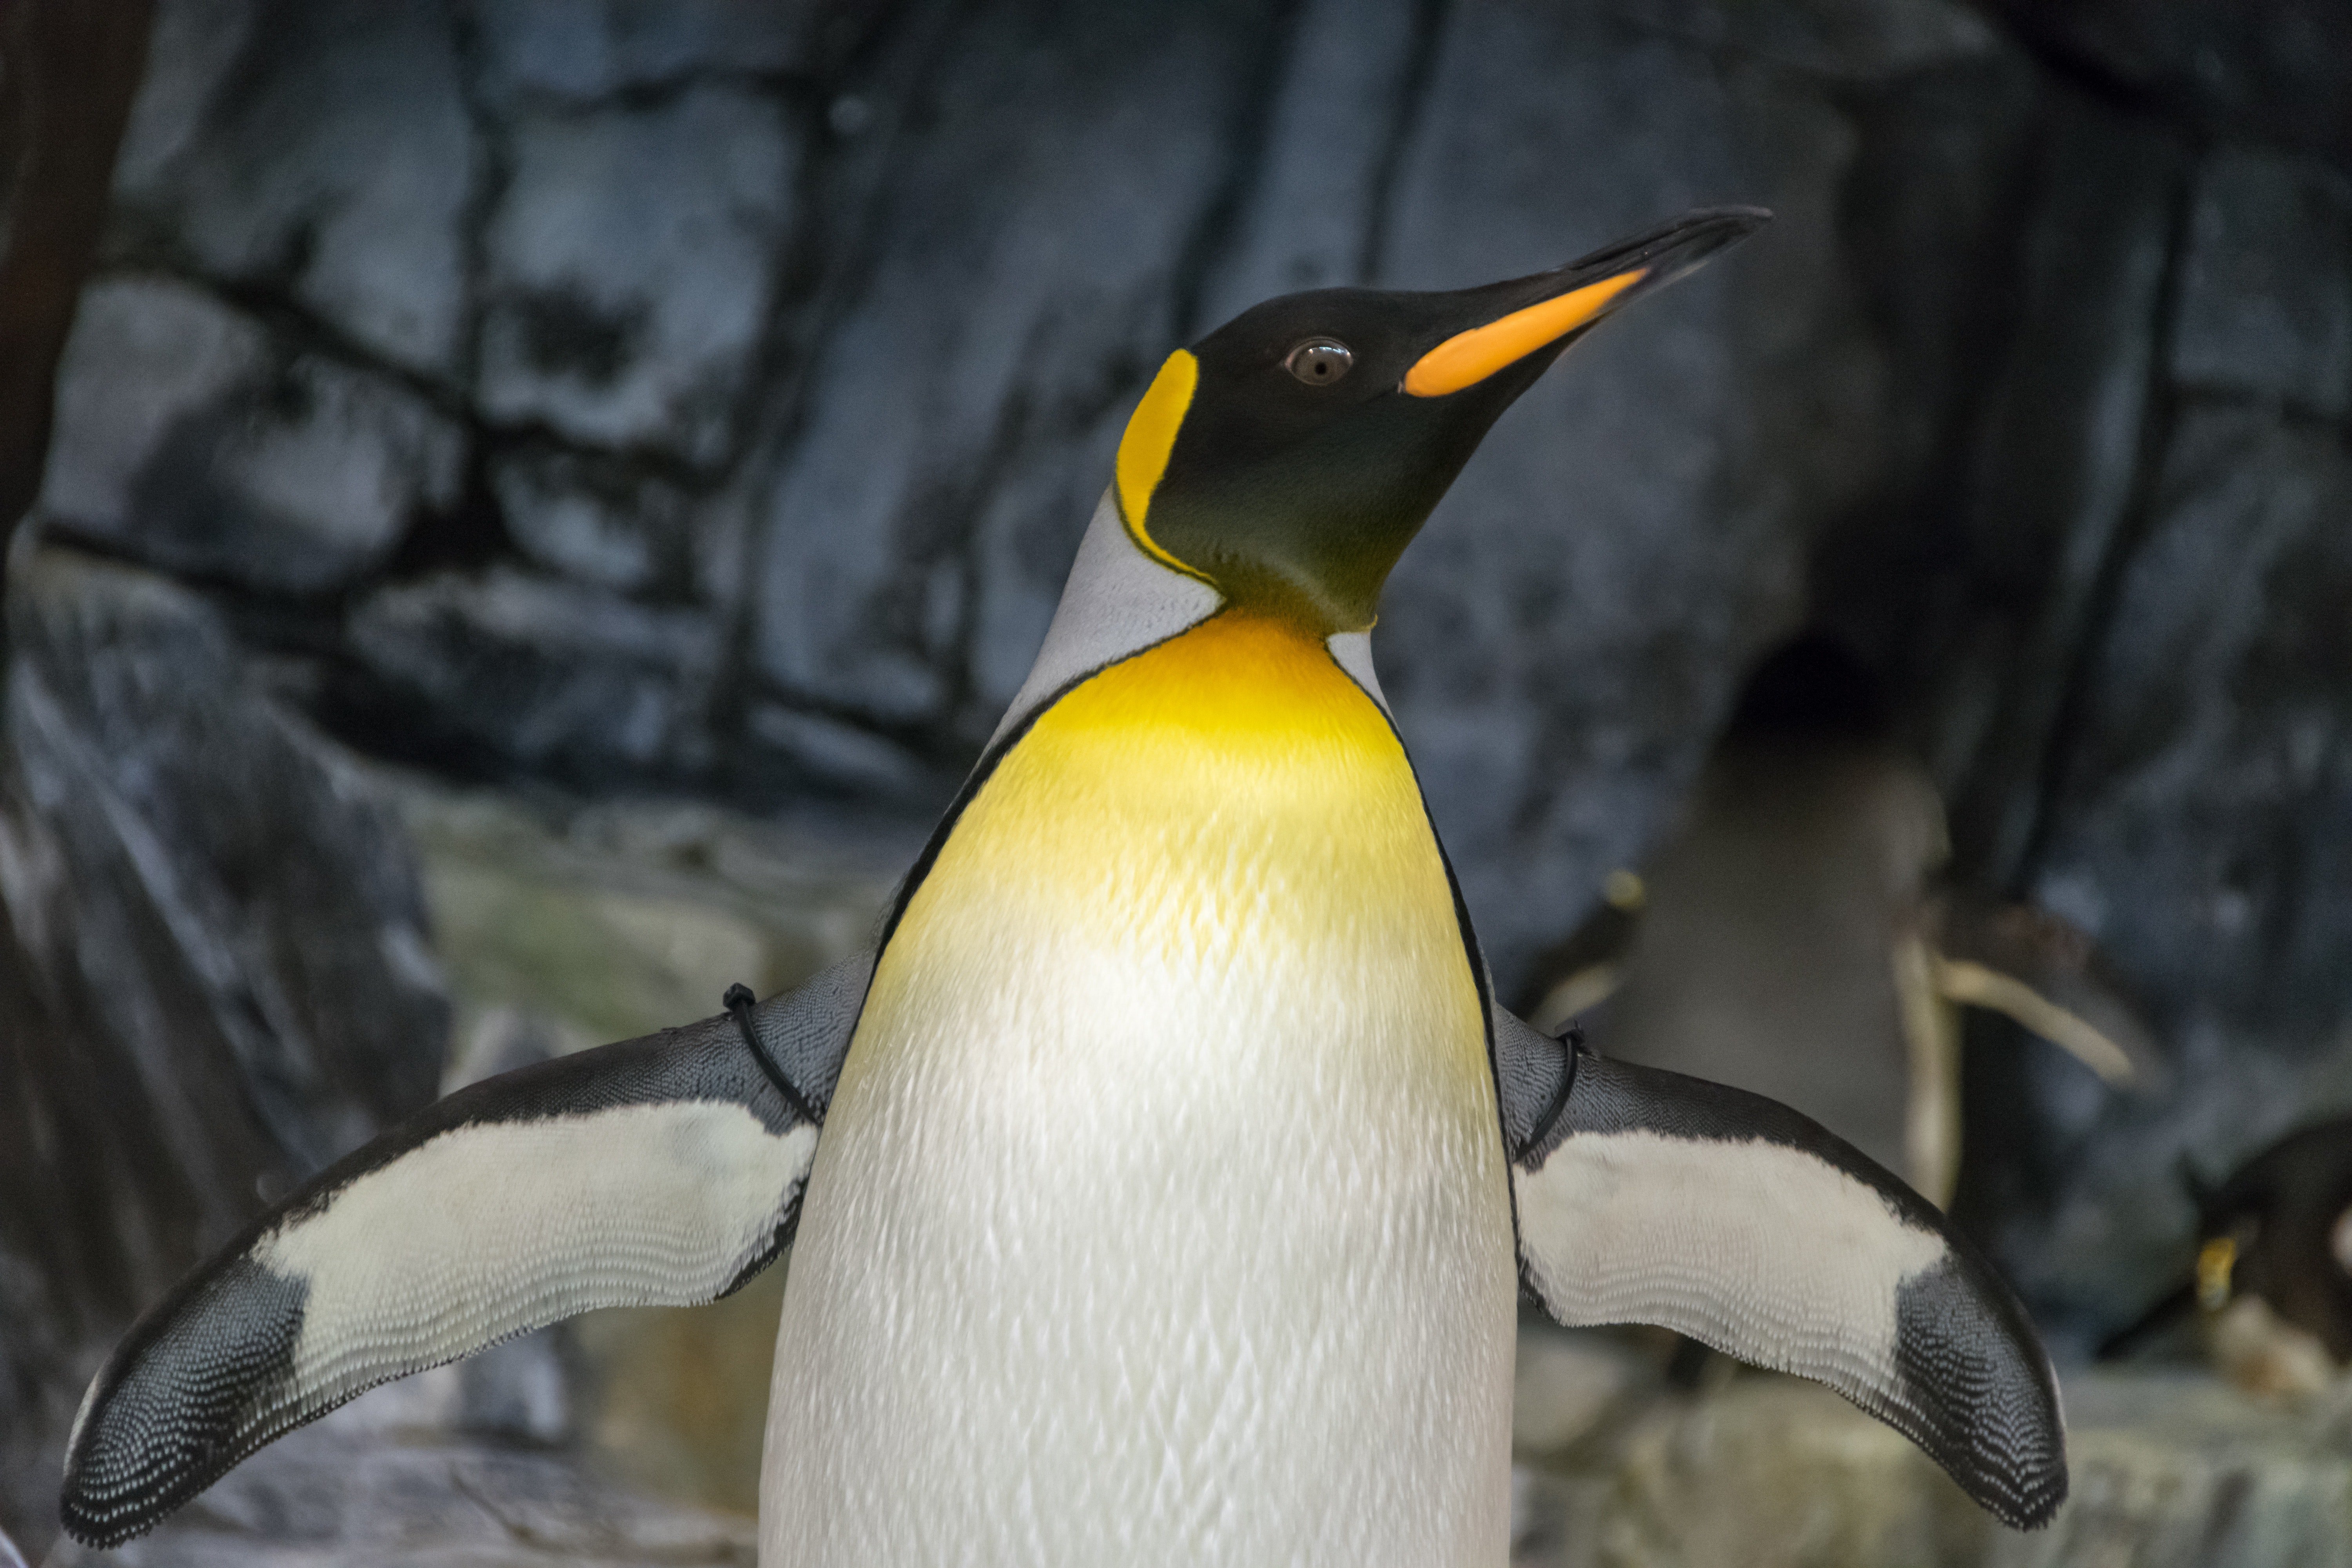 A yellow and black penguin. | Photo: Pexels/ Uncoated